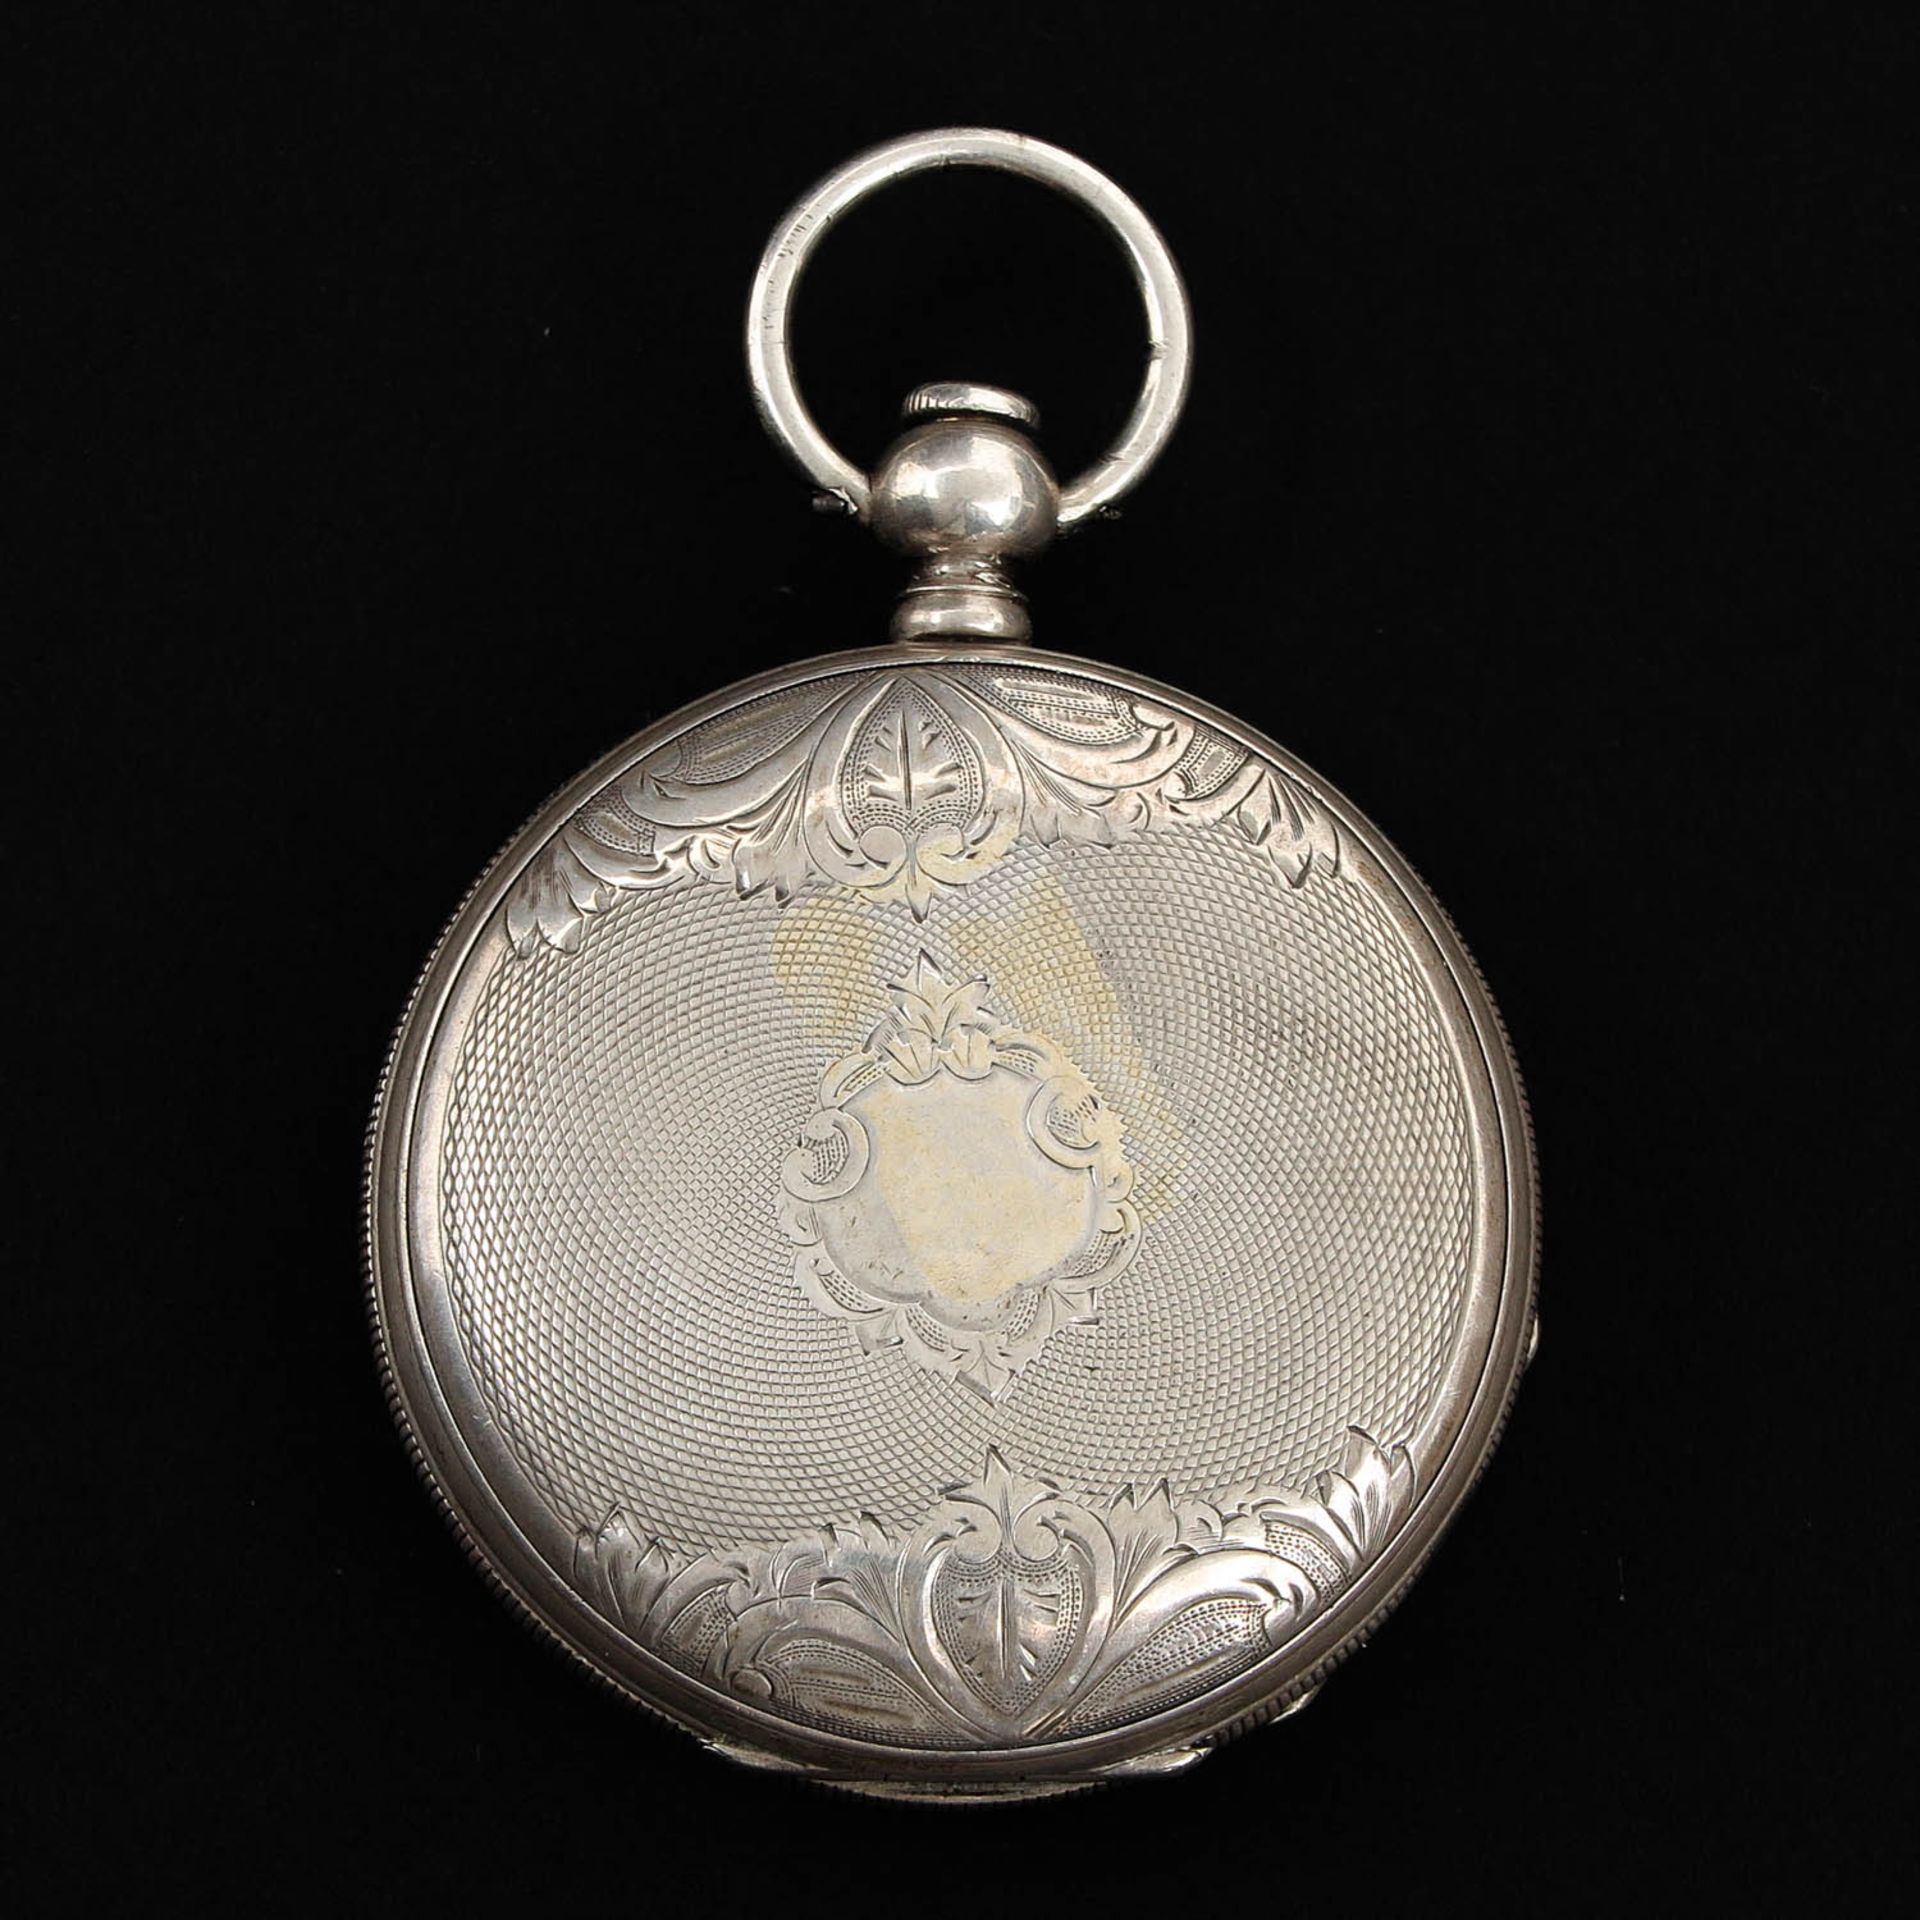 A Pocket Watch by Jacot & Son - Image 2 of 8